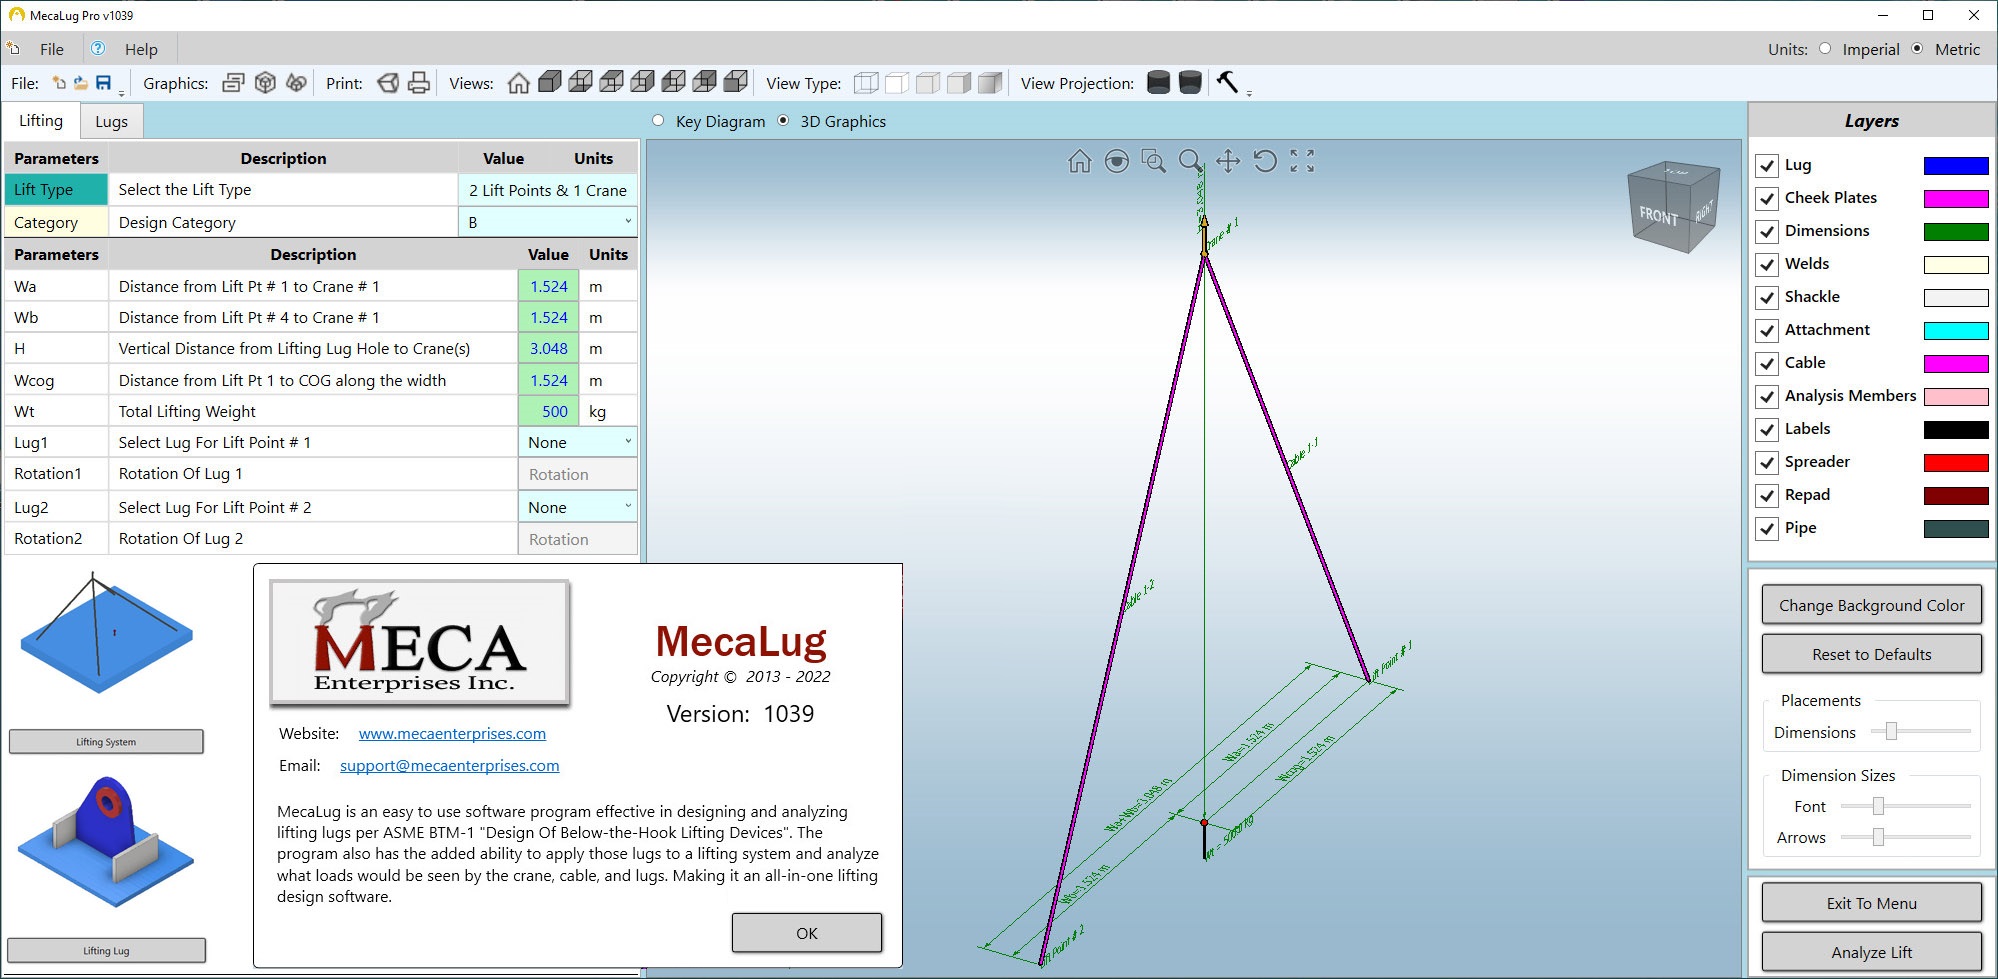 Working with MECA MecaLug 1039 full license